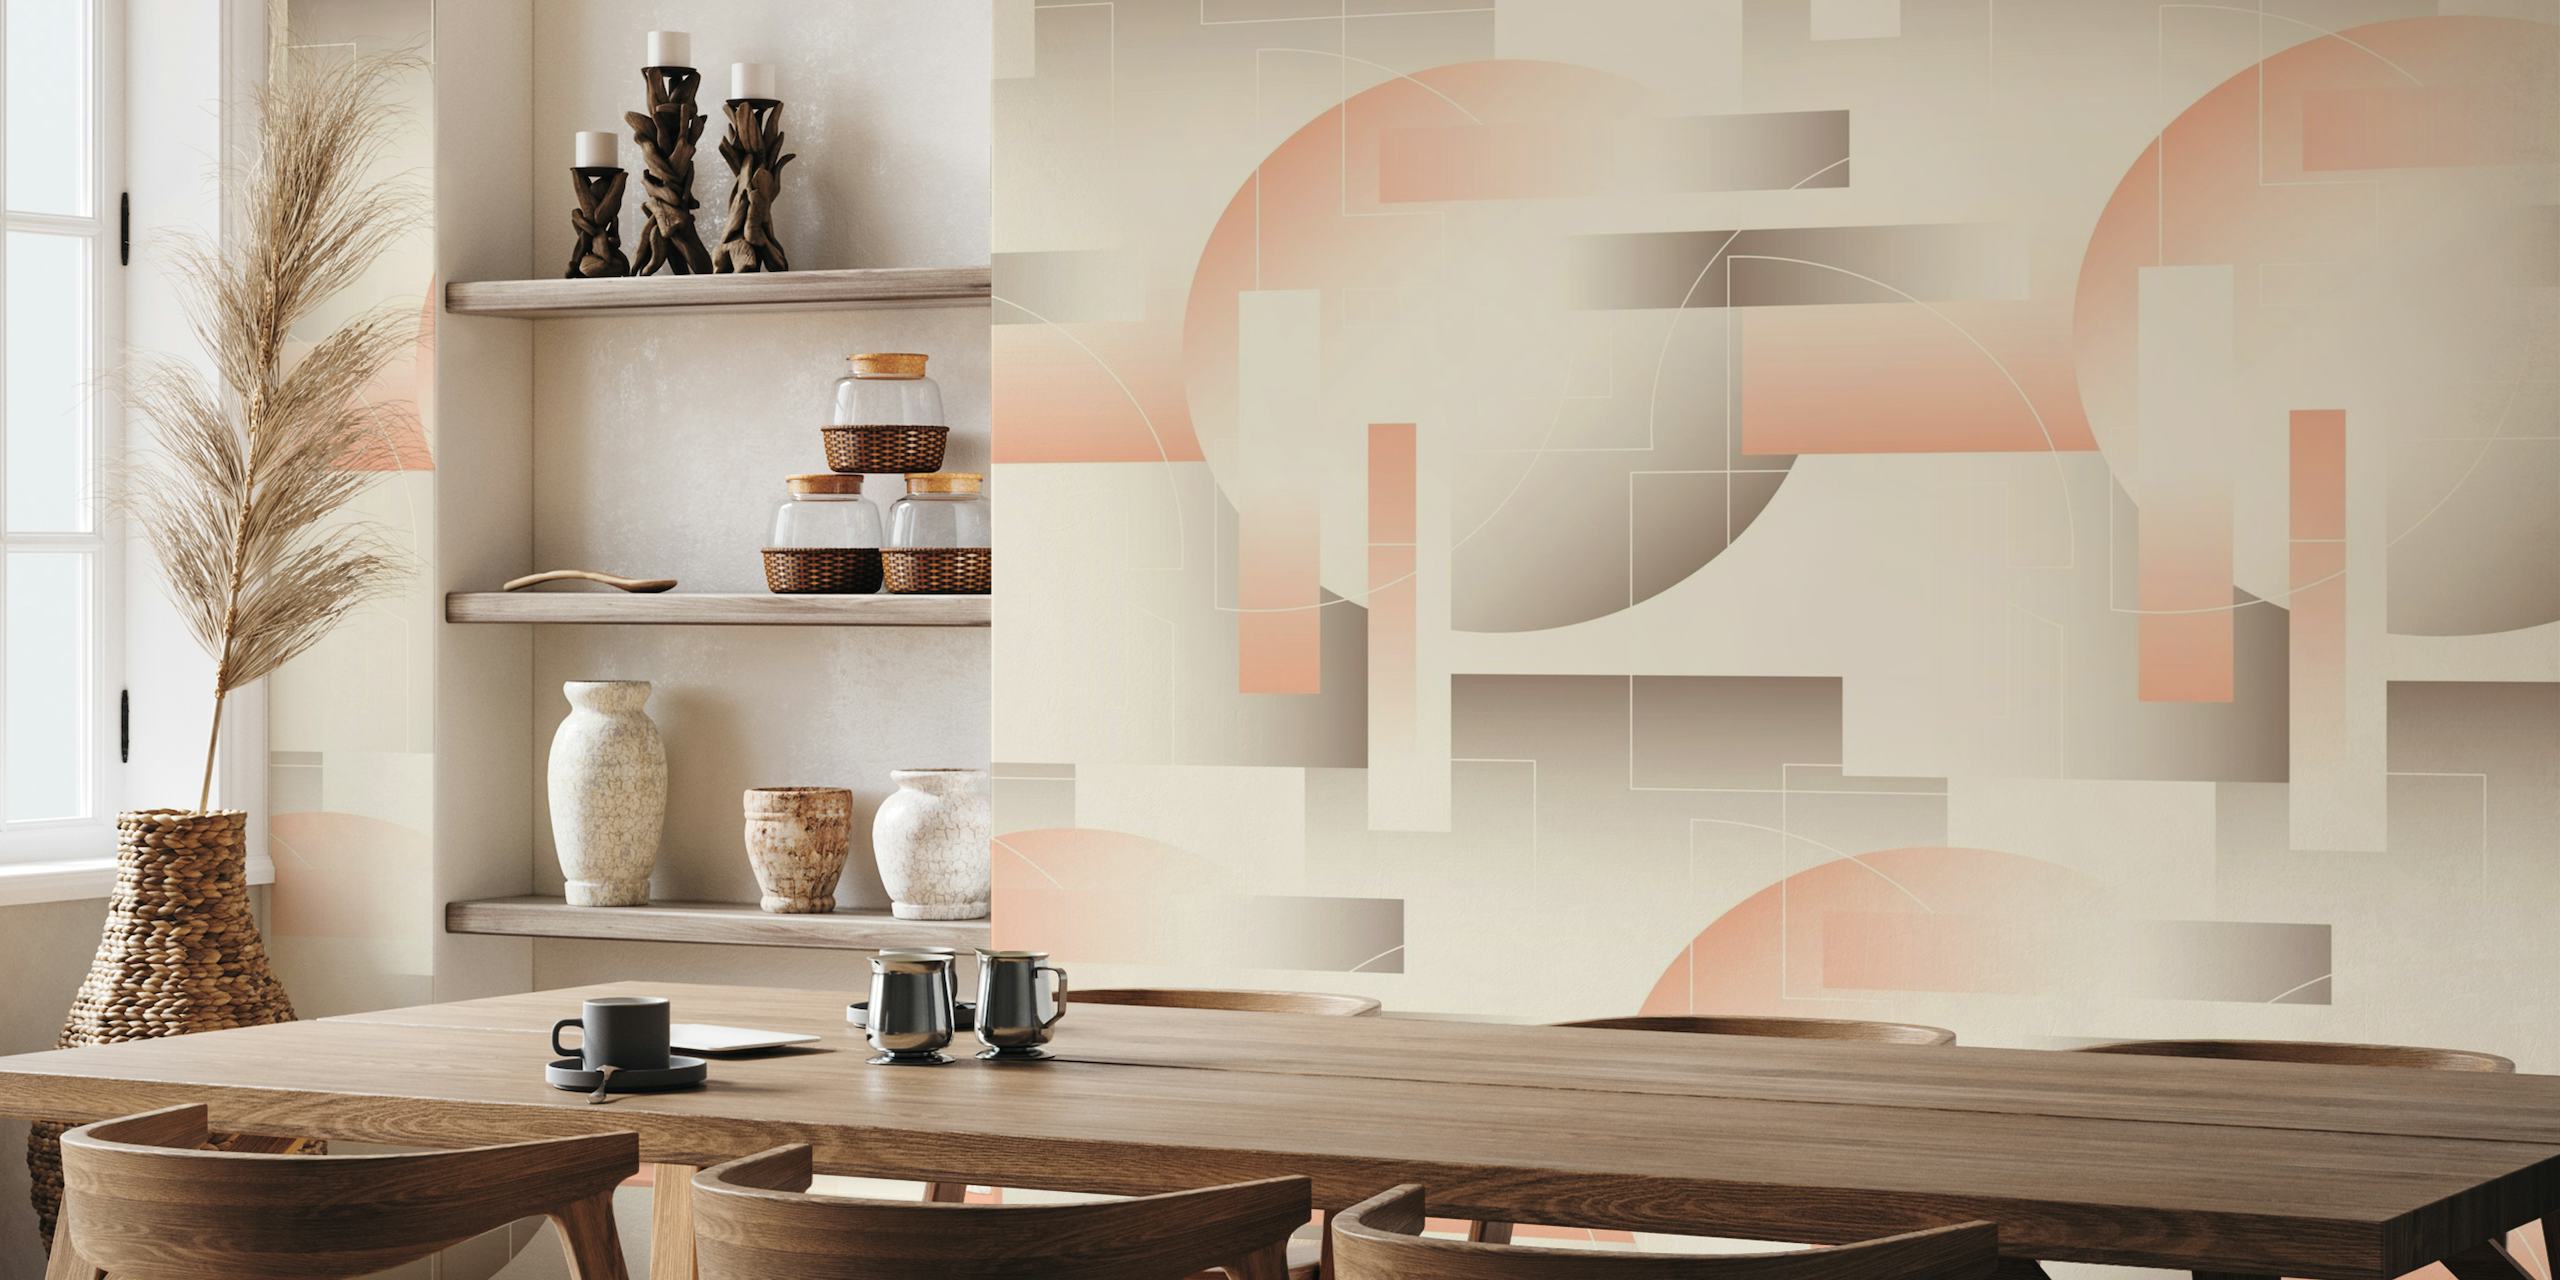 Geometric Gradient peach brown wall mural with soft tones and abstract shapes